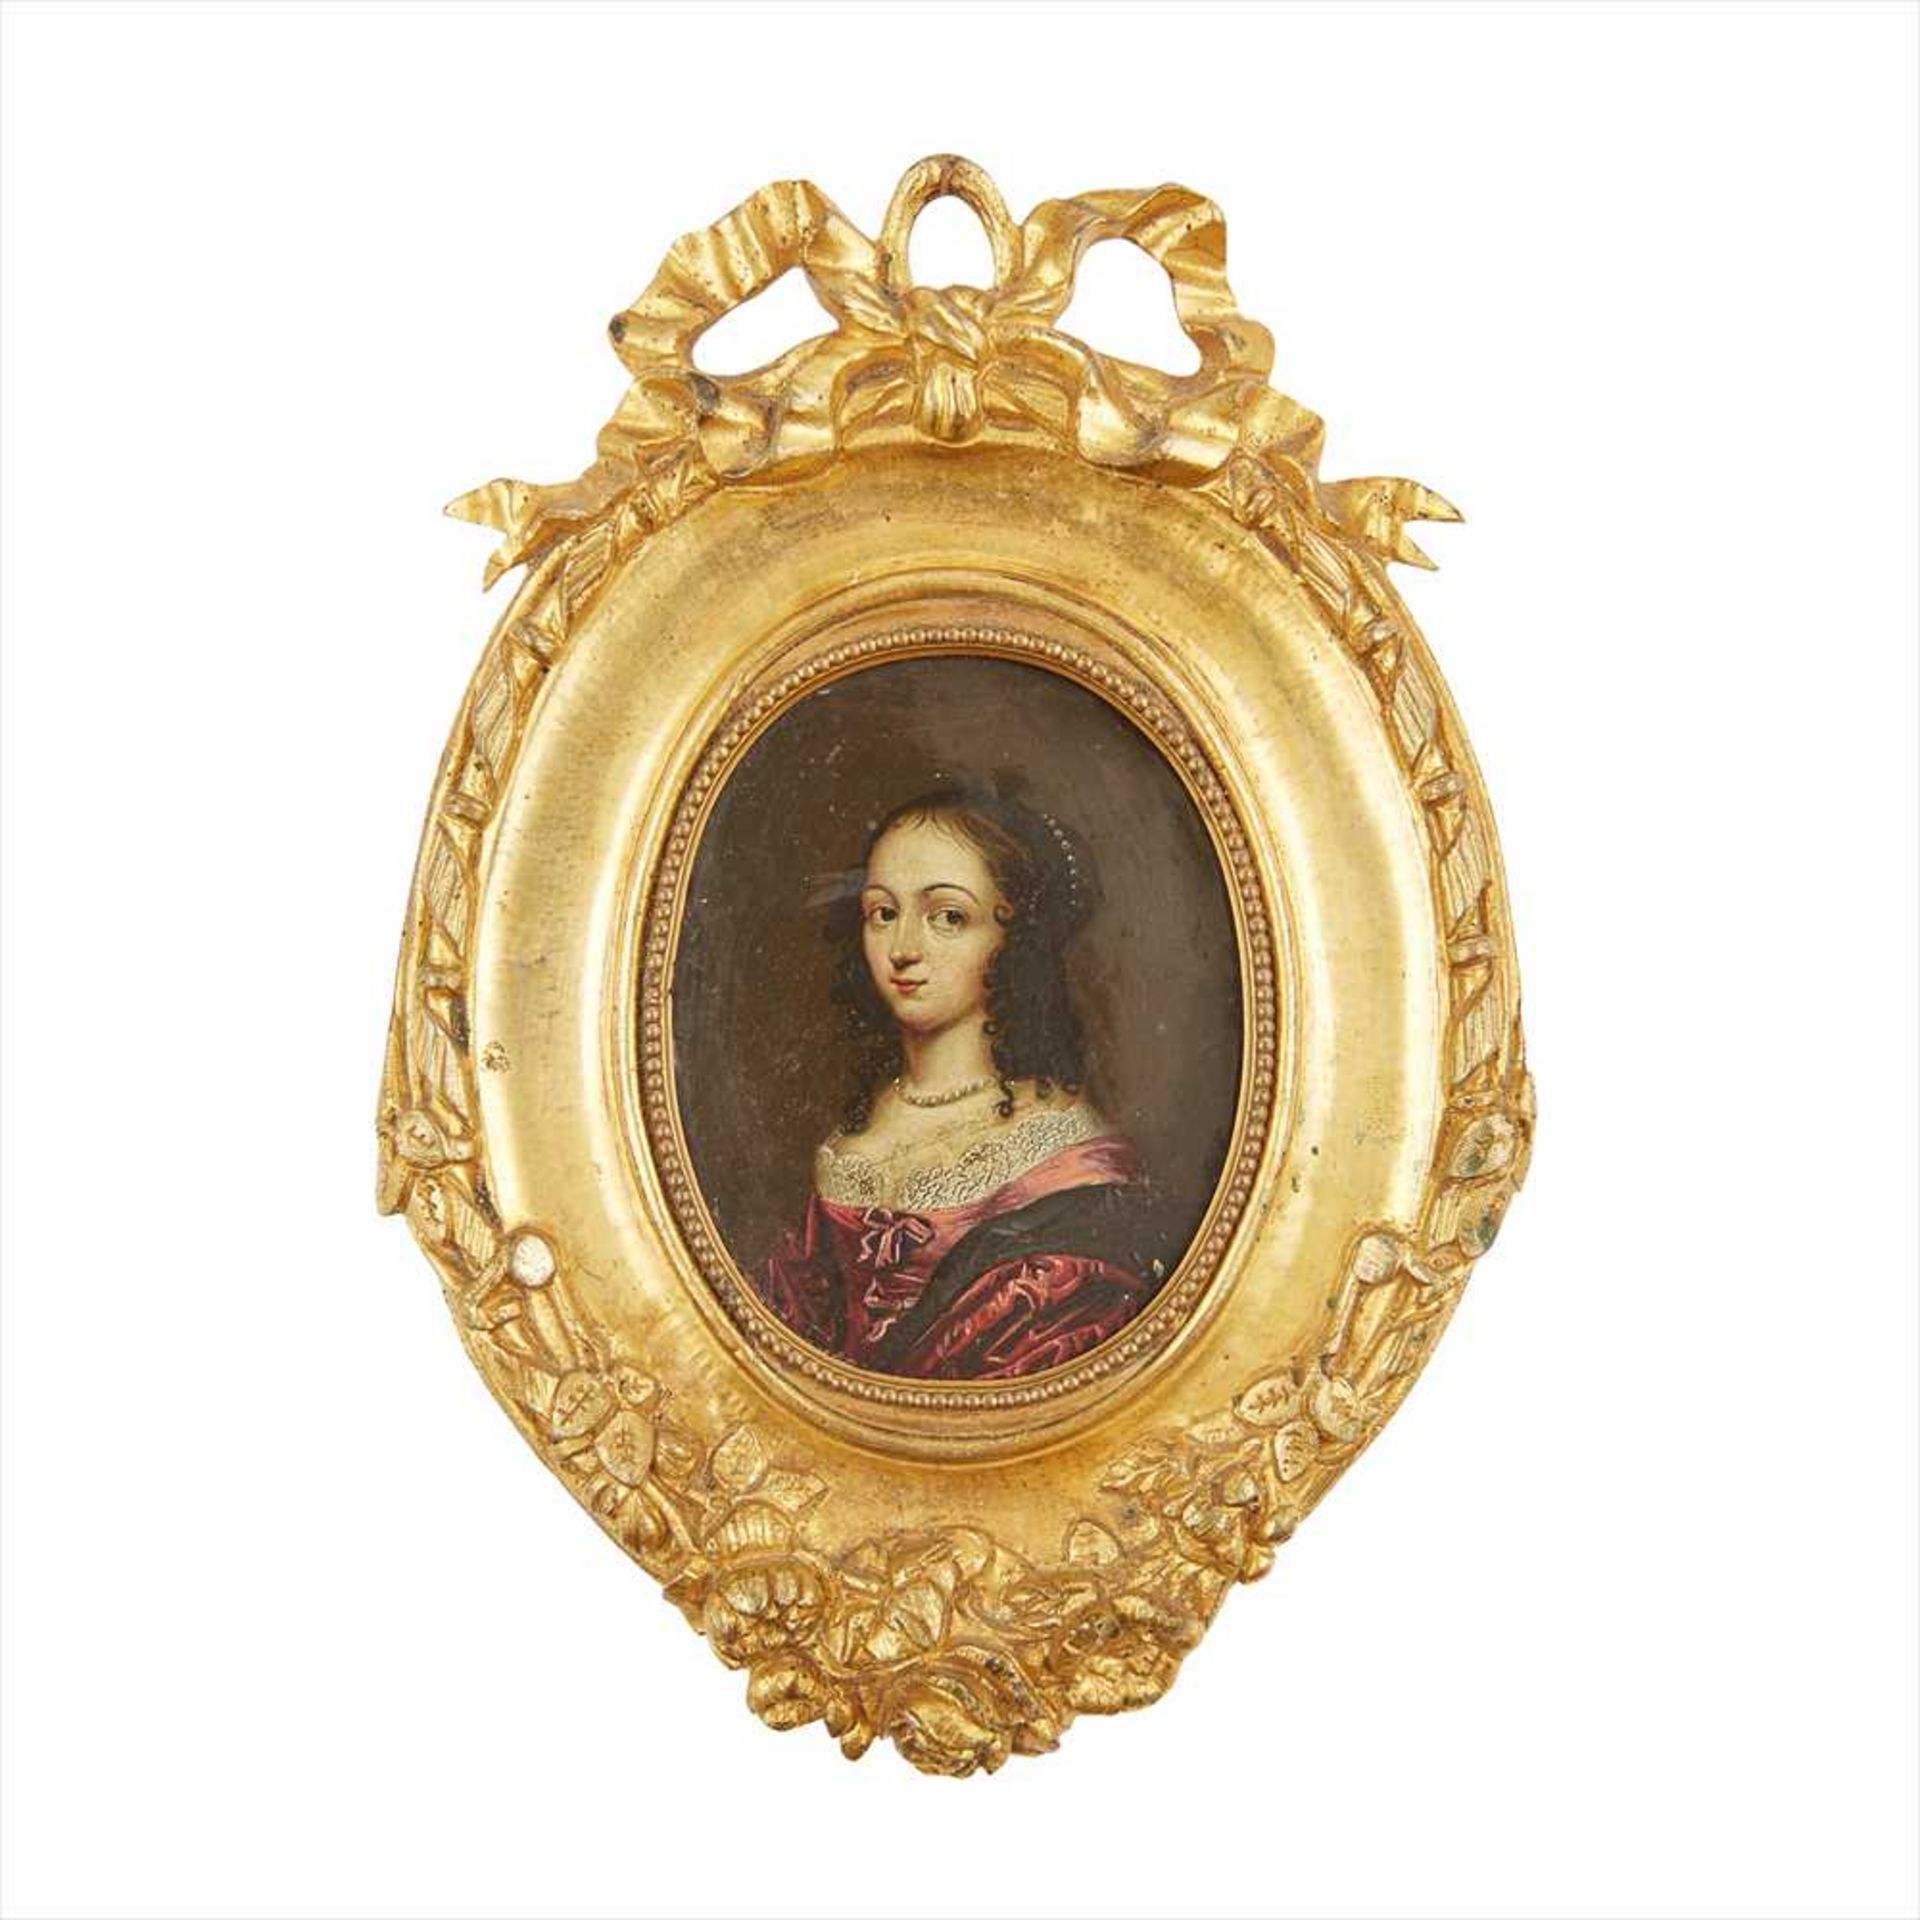 ENGLISH SCHOOL, 17TH CENTURY PORTRAIT MINIATURE OF A YOUNG LADY - Image 2 of 2